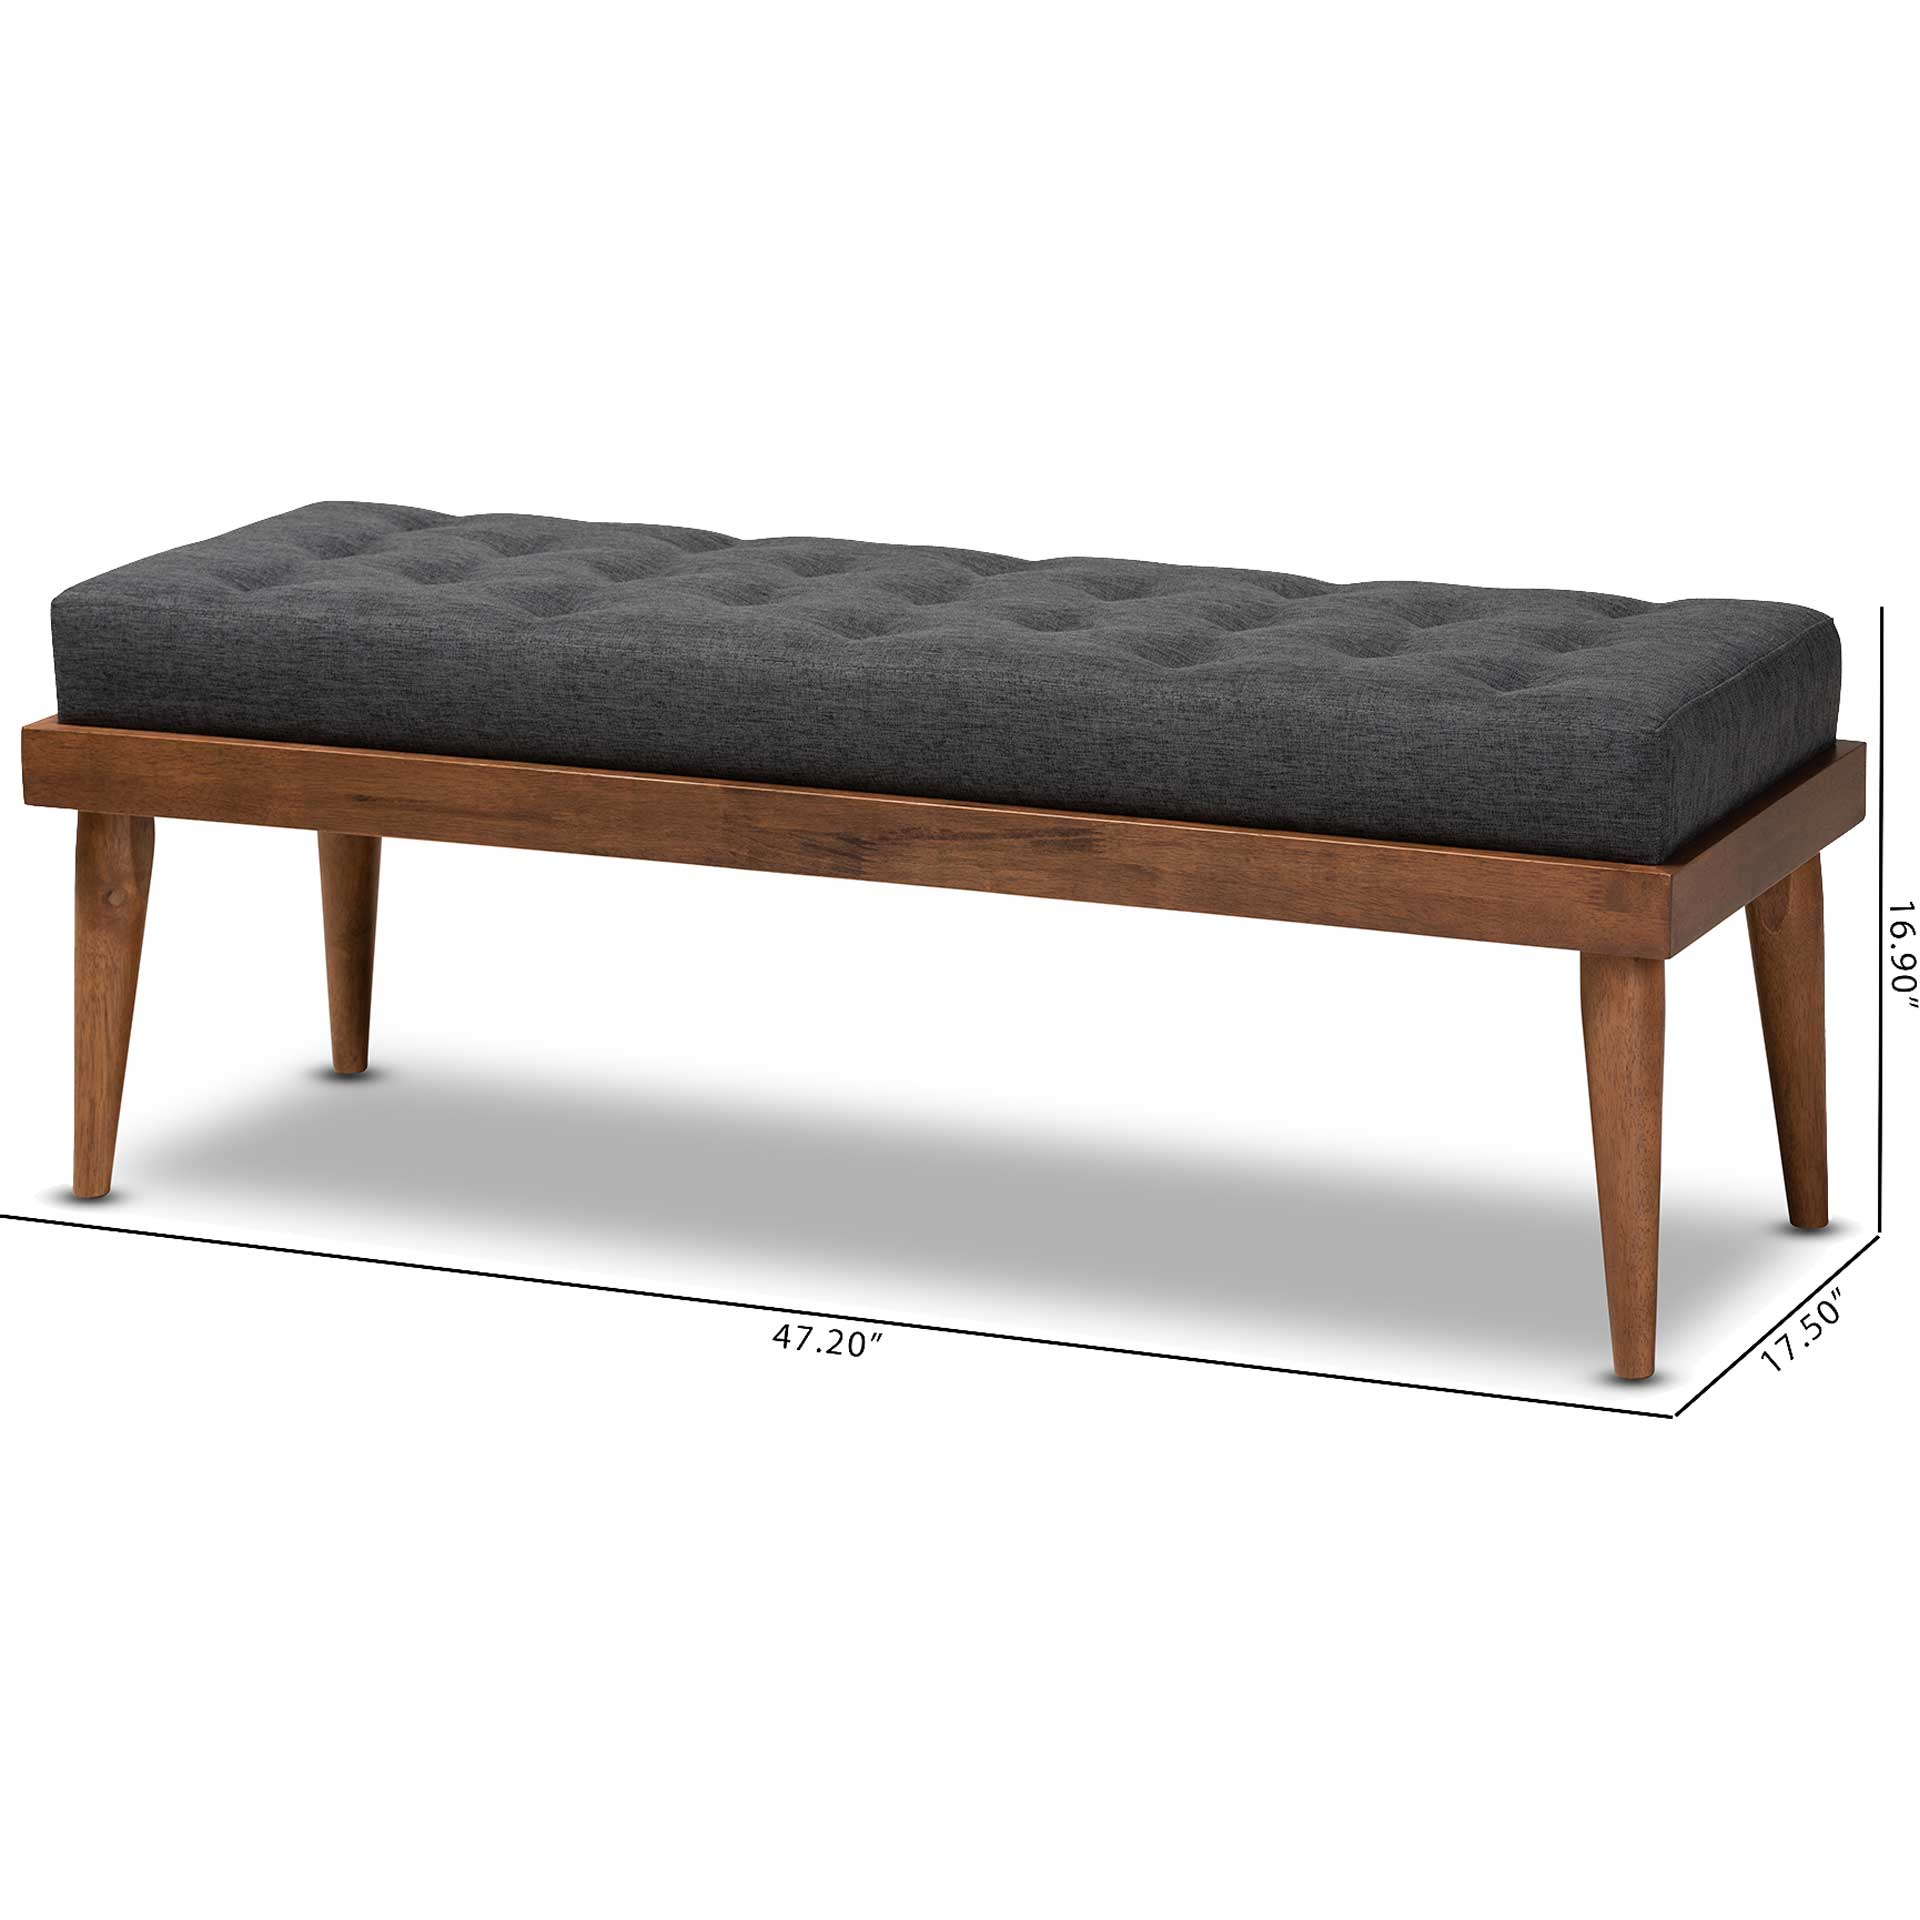 Seattle Fabric Upholstered Bench Charcoal/Walnut